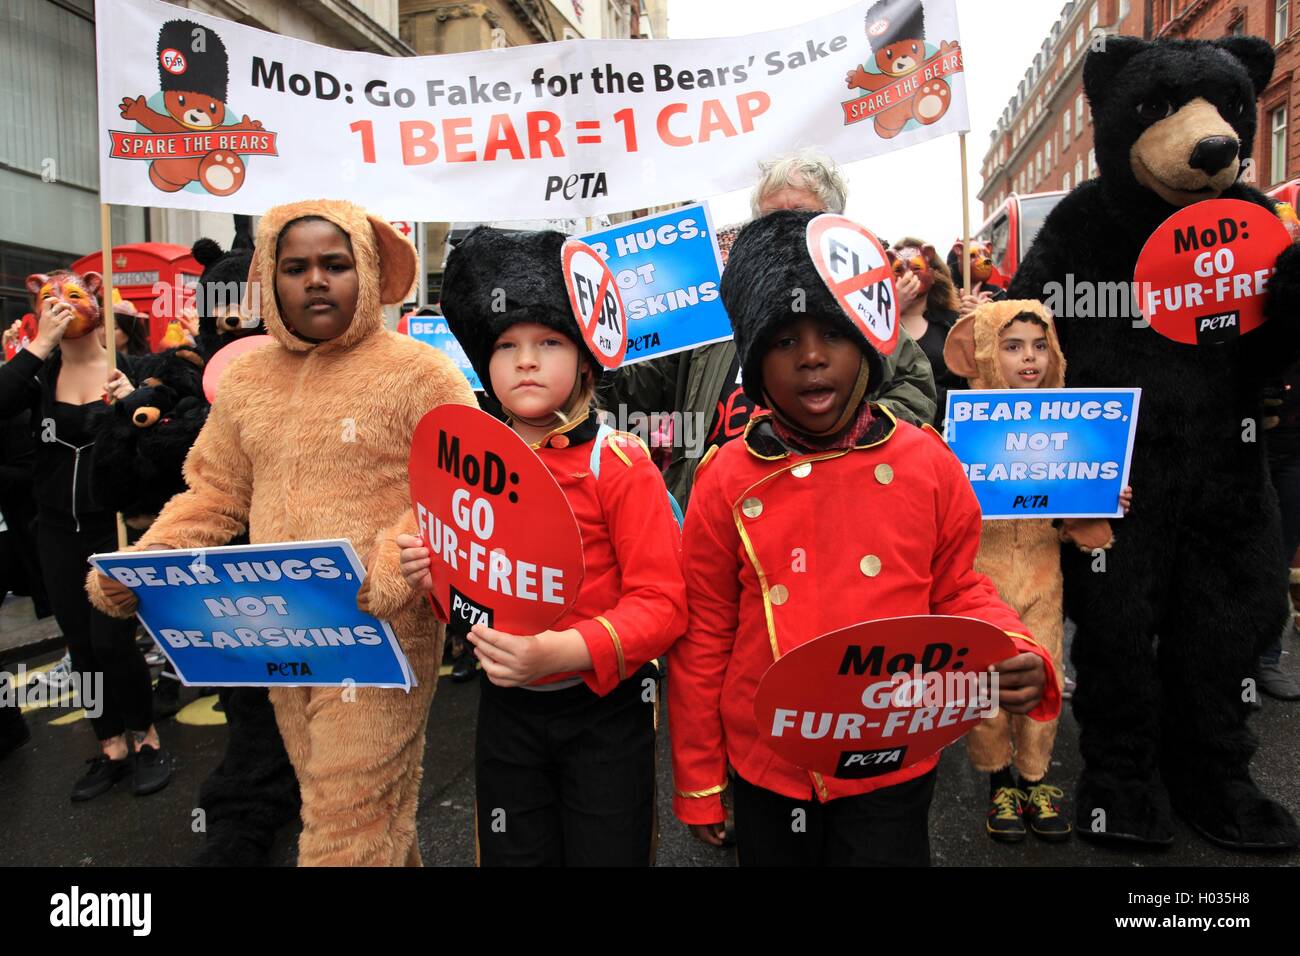 PETA protest against the use of real fur caps by the (MOD) Ministry of Defence, London, UK. Stock Photo